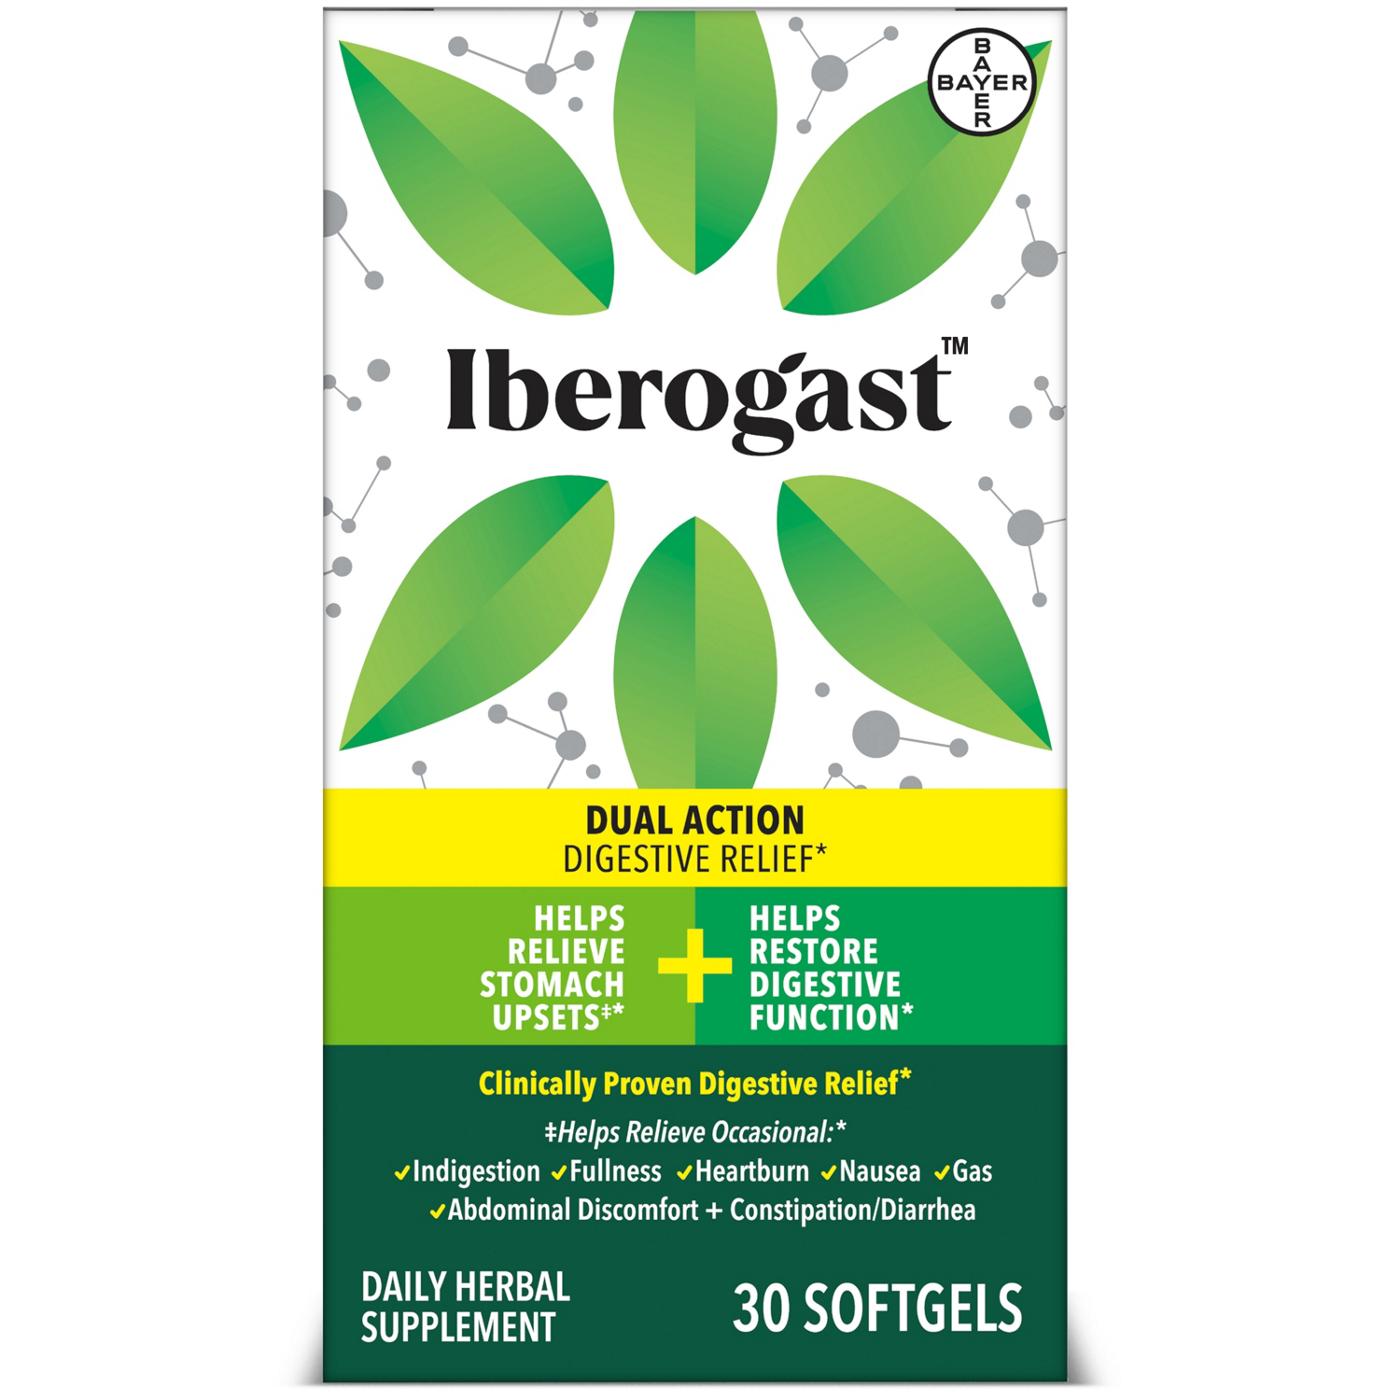 Iberogast Dual Action Digestive Relief Soft Gels; image 1 of 2